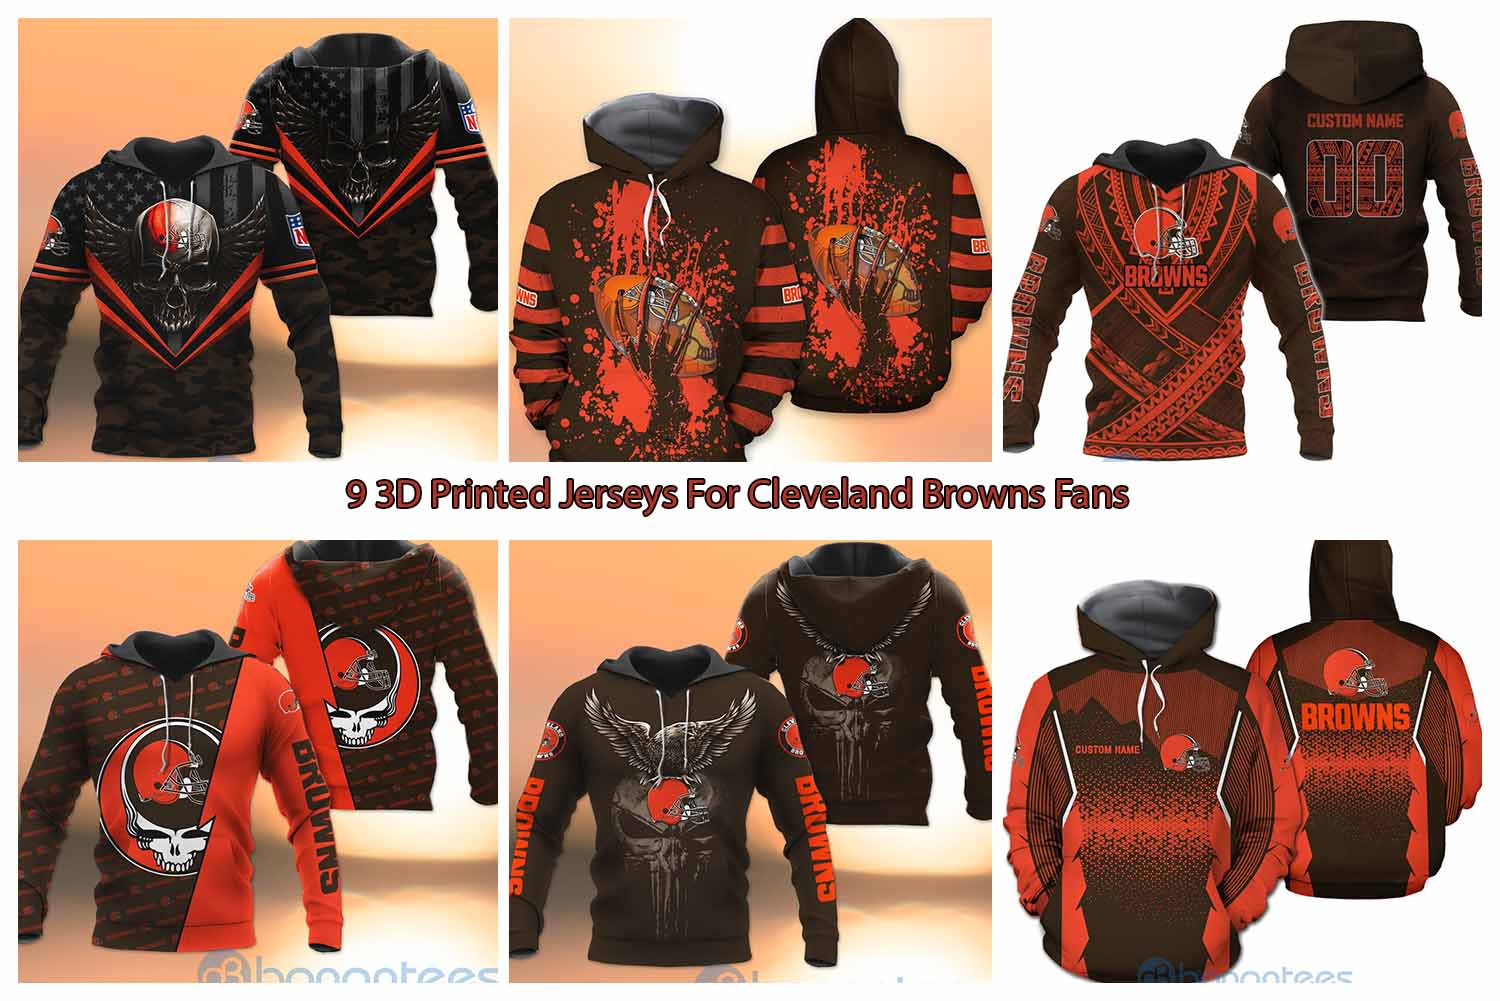 9 3D Printed Jerseys For Cleveland Browns Fans